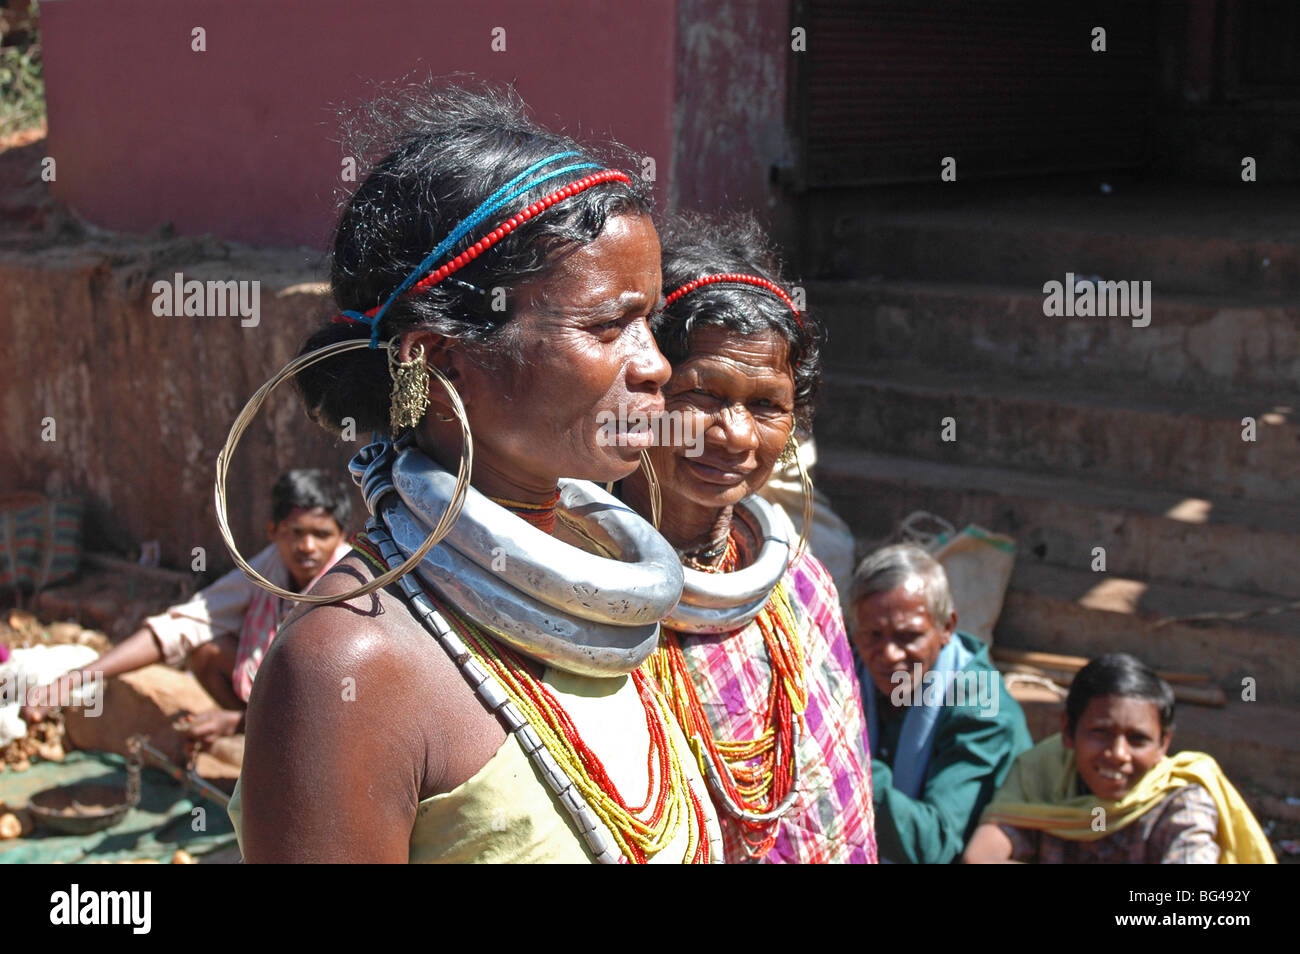 Gadaba tribeswomen in traditional dress with large earrings and necklaces denoting their tribe, Onukudelli, Orissa, India, Asia Stock Photo